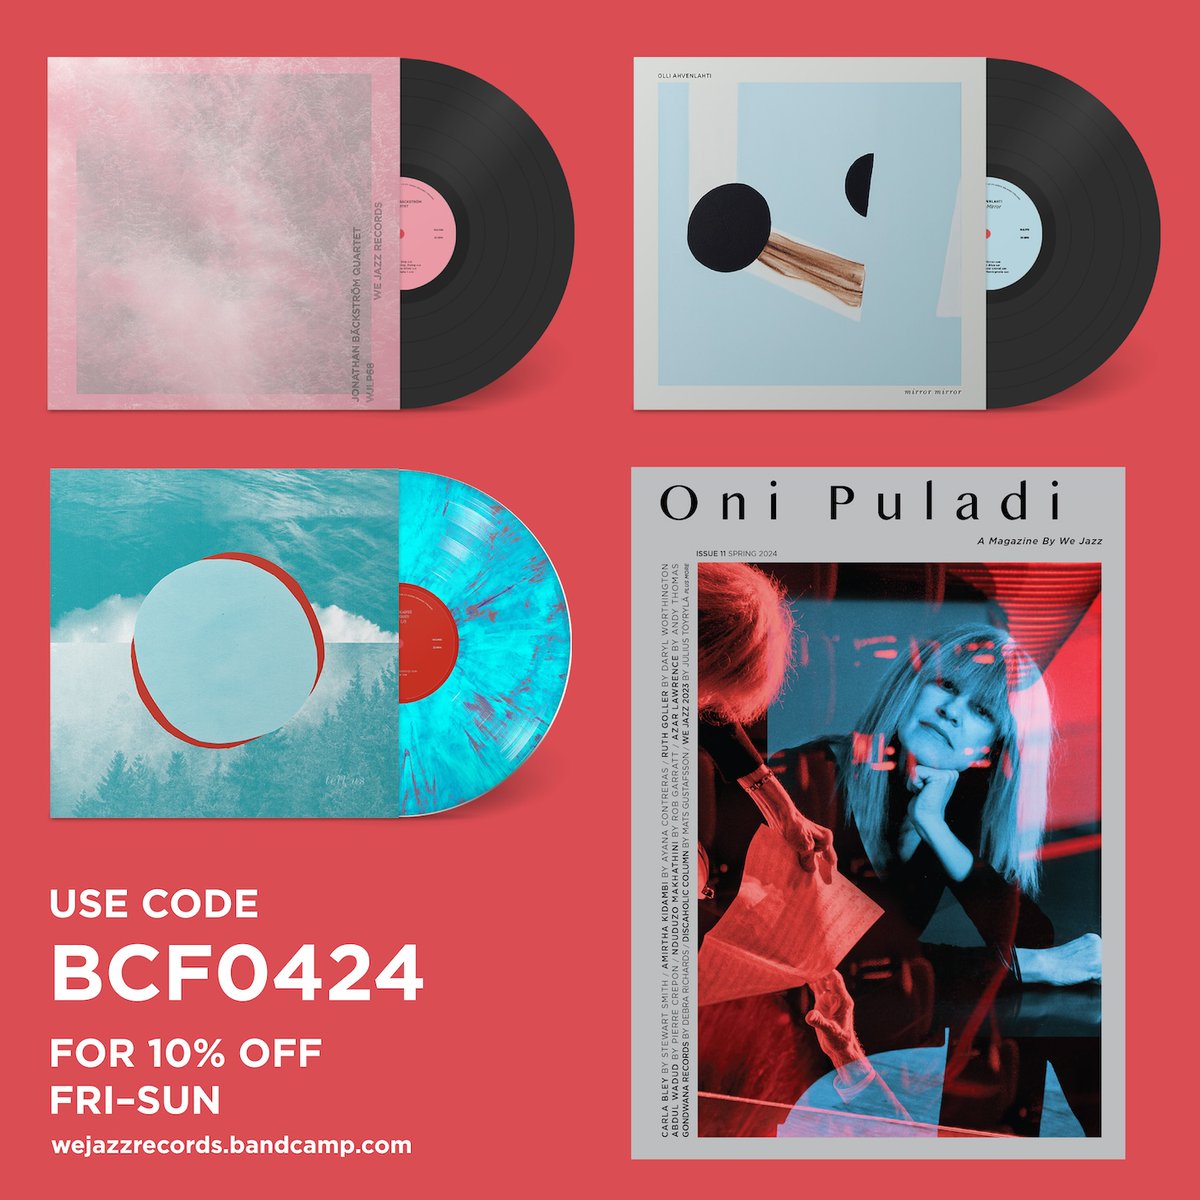 Celebrate @Bandcamp Friday with us: use the code BCF0424 for a cool 10% off on everything all weekend long until Sunday night. Go here: wejazzrecords.bandcamp.com Thank you Bandcamp for facilitating this and thank you all music fans for supporting creative music.